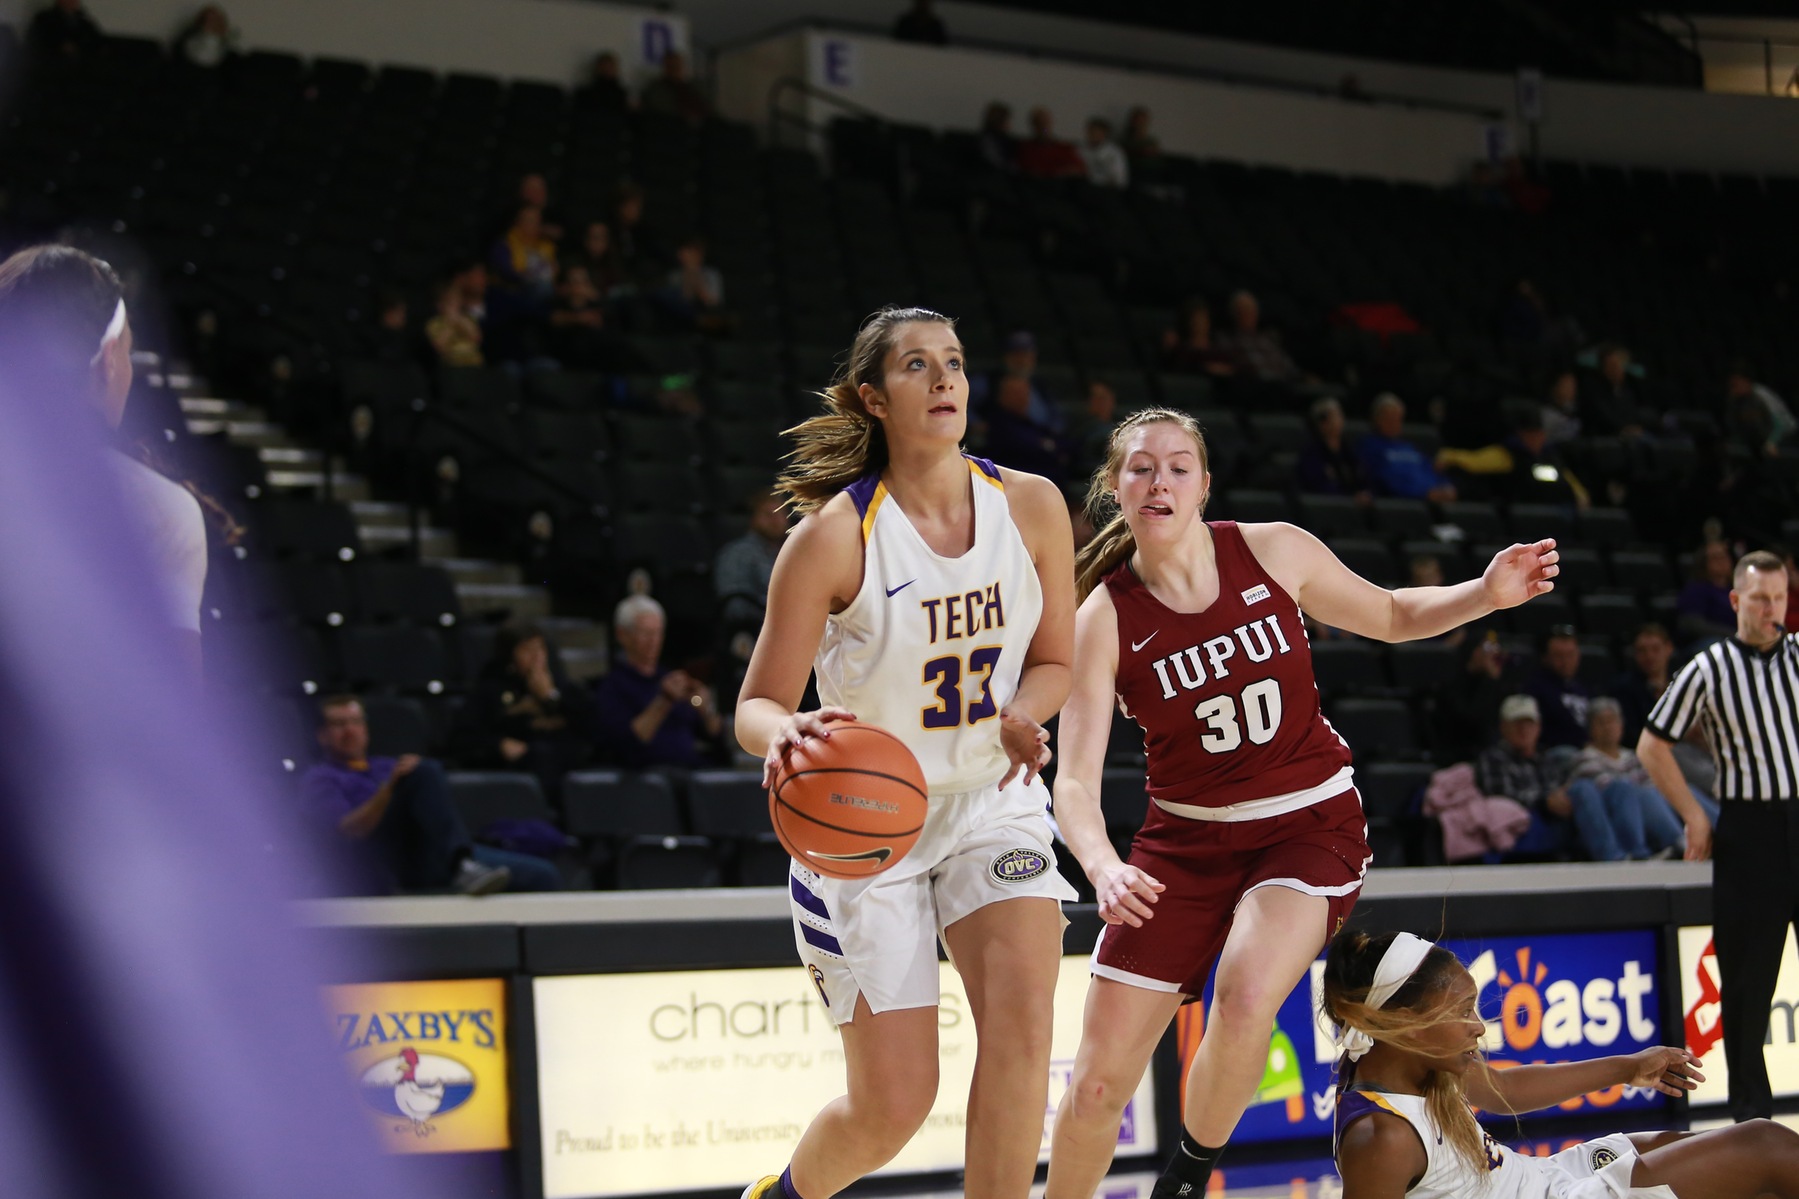 Turnovers hurt Tech in loss to IUPUI